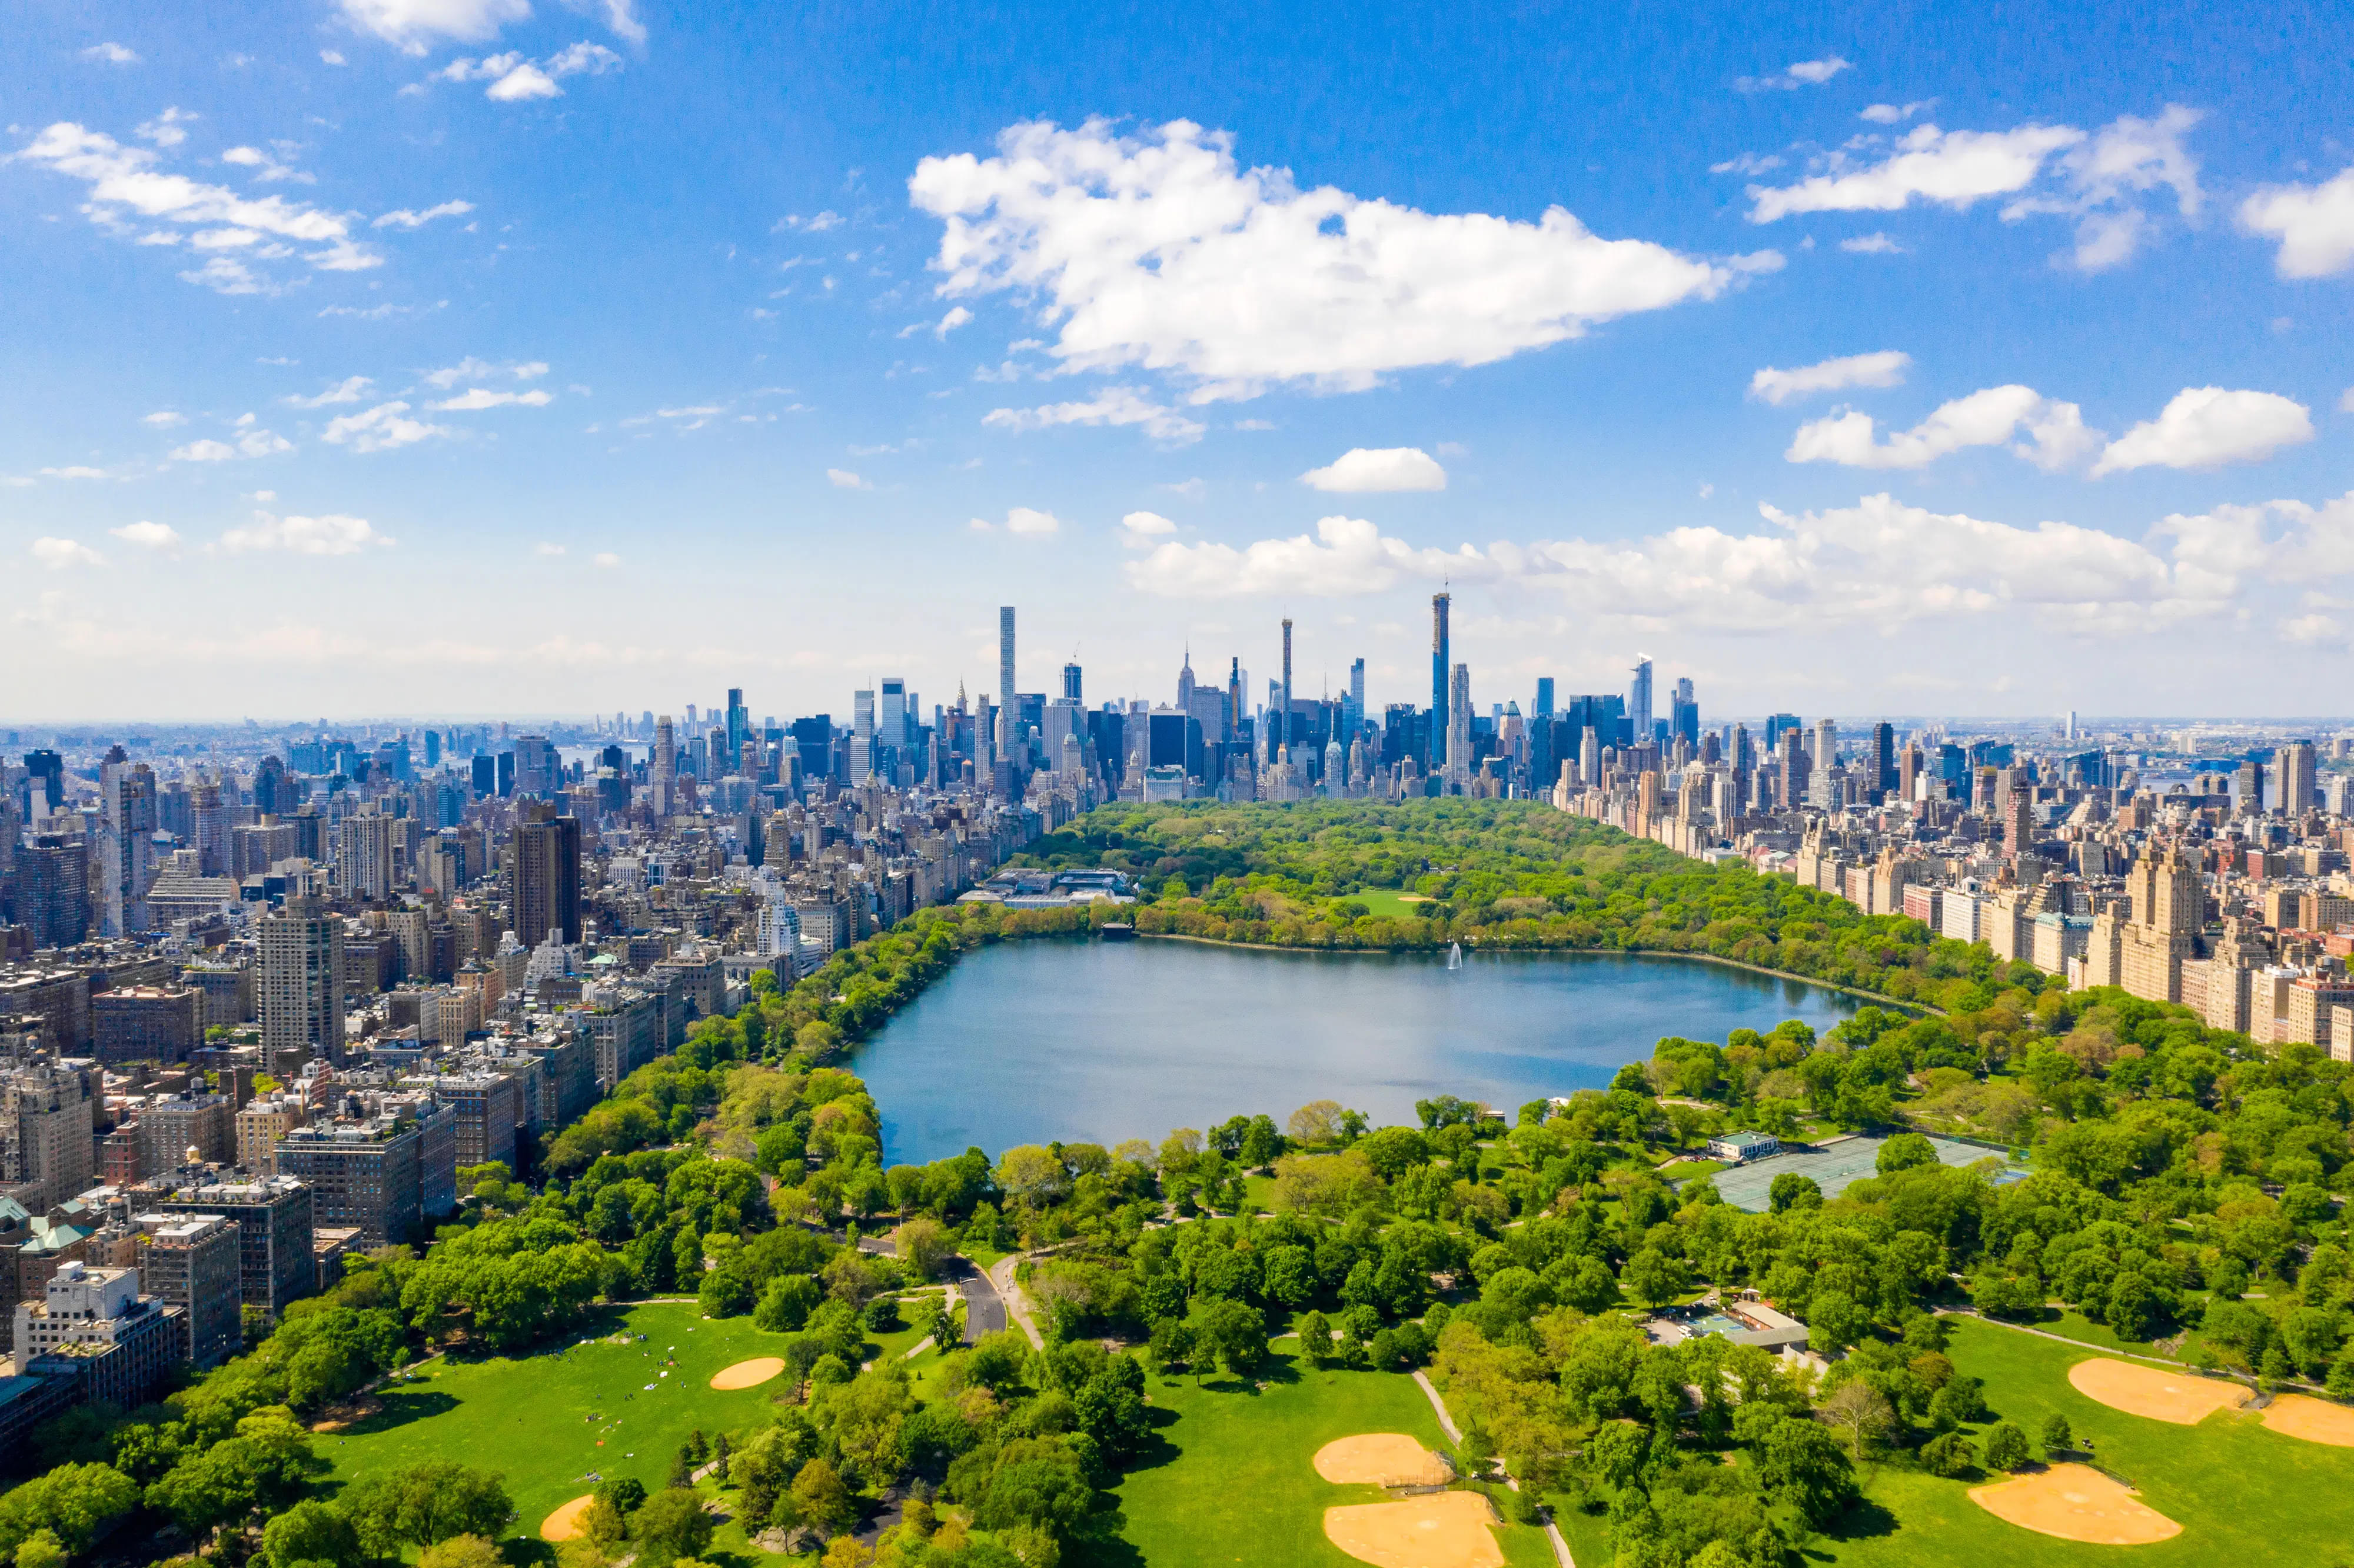 Things to Do in New York City